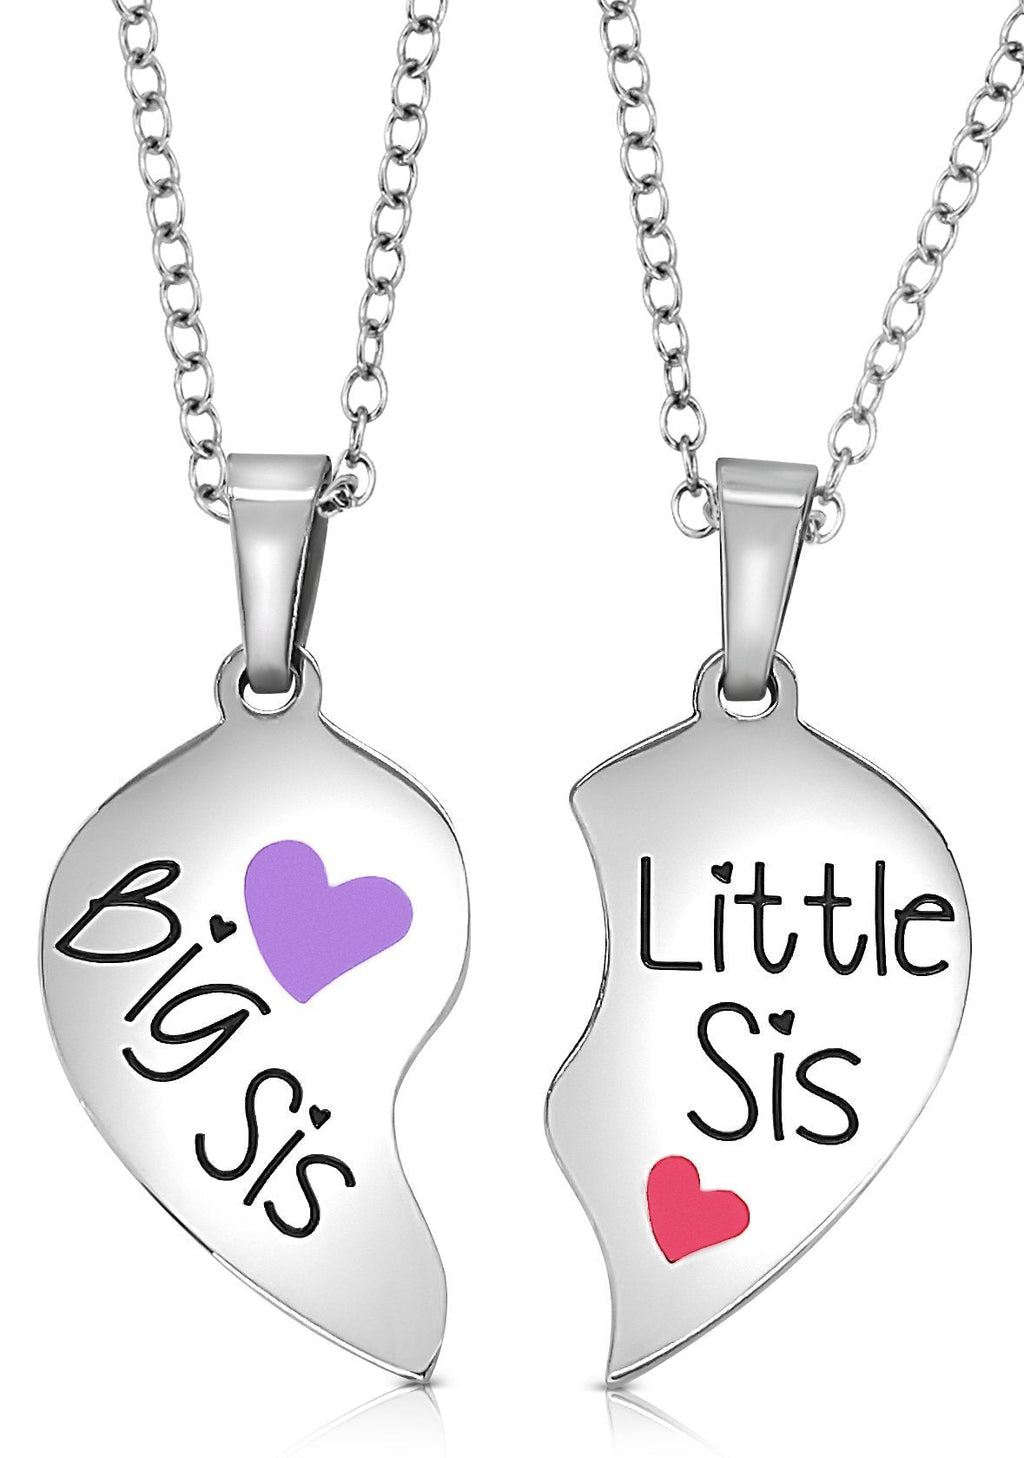 [Australia] - Big Sis & Lil Sis Gifts Jewelry Heart Necklace Set, 2 Sister Necklaces, Big & Little Sisters Jewelry Big Sis Purple - Little Sis Pink 